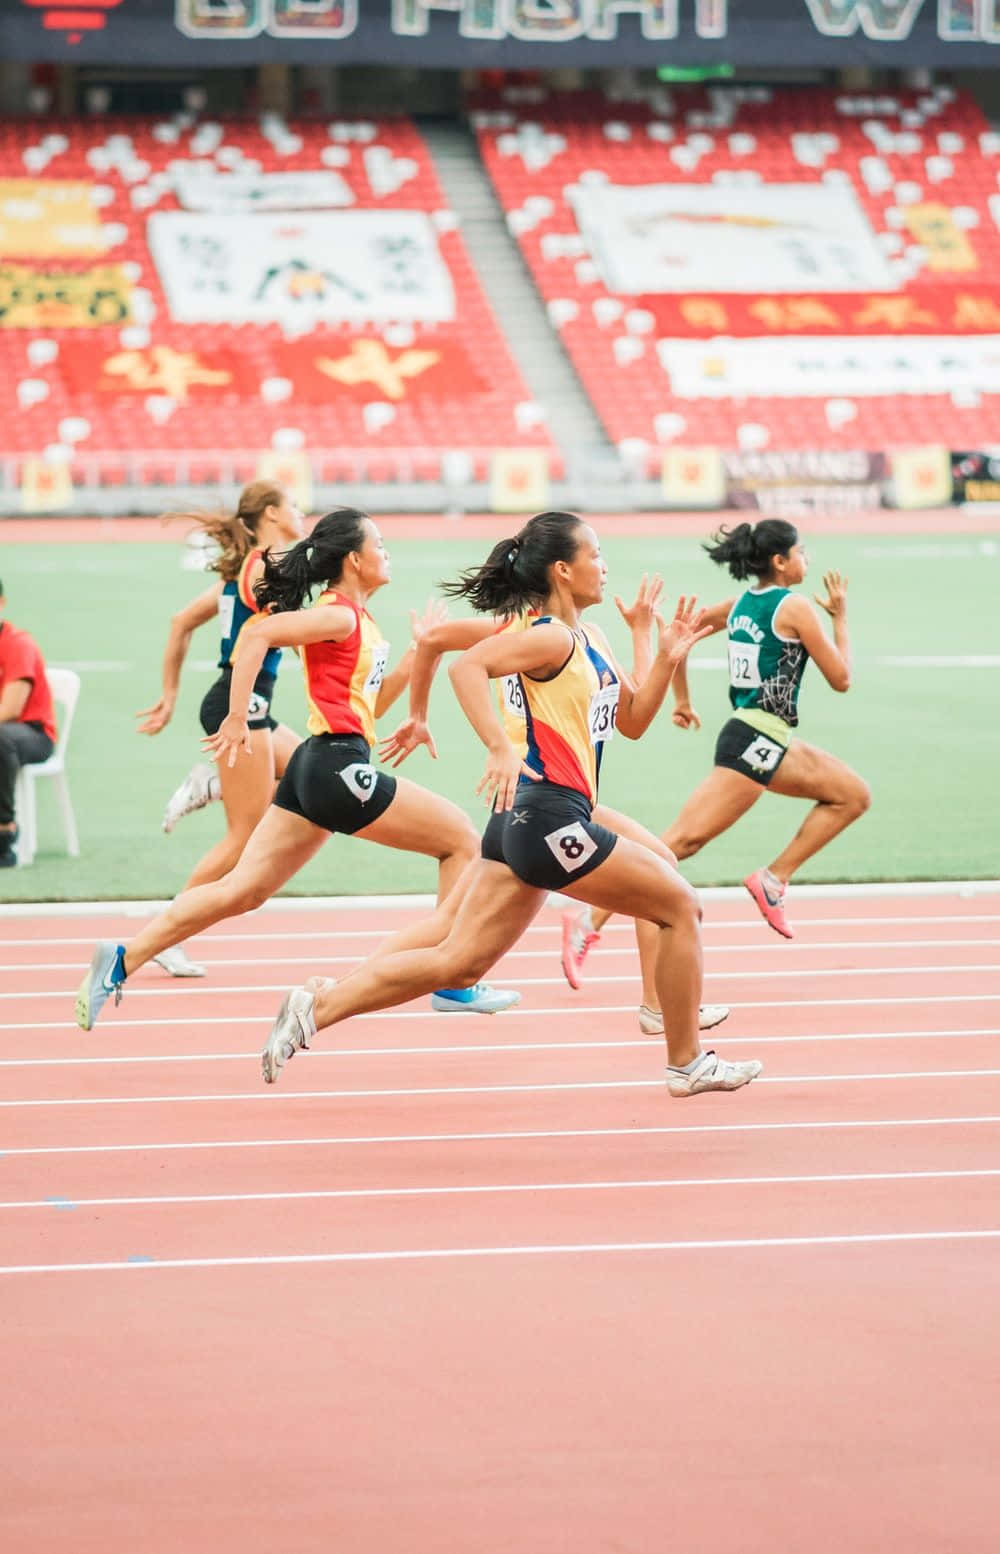 A Group Of Women Running On A Track In A Stadium Wallpaper